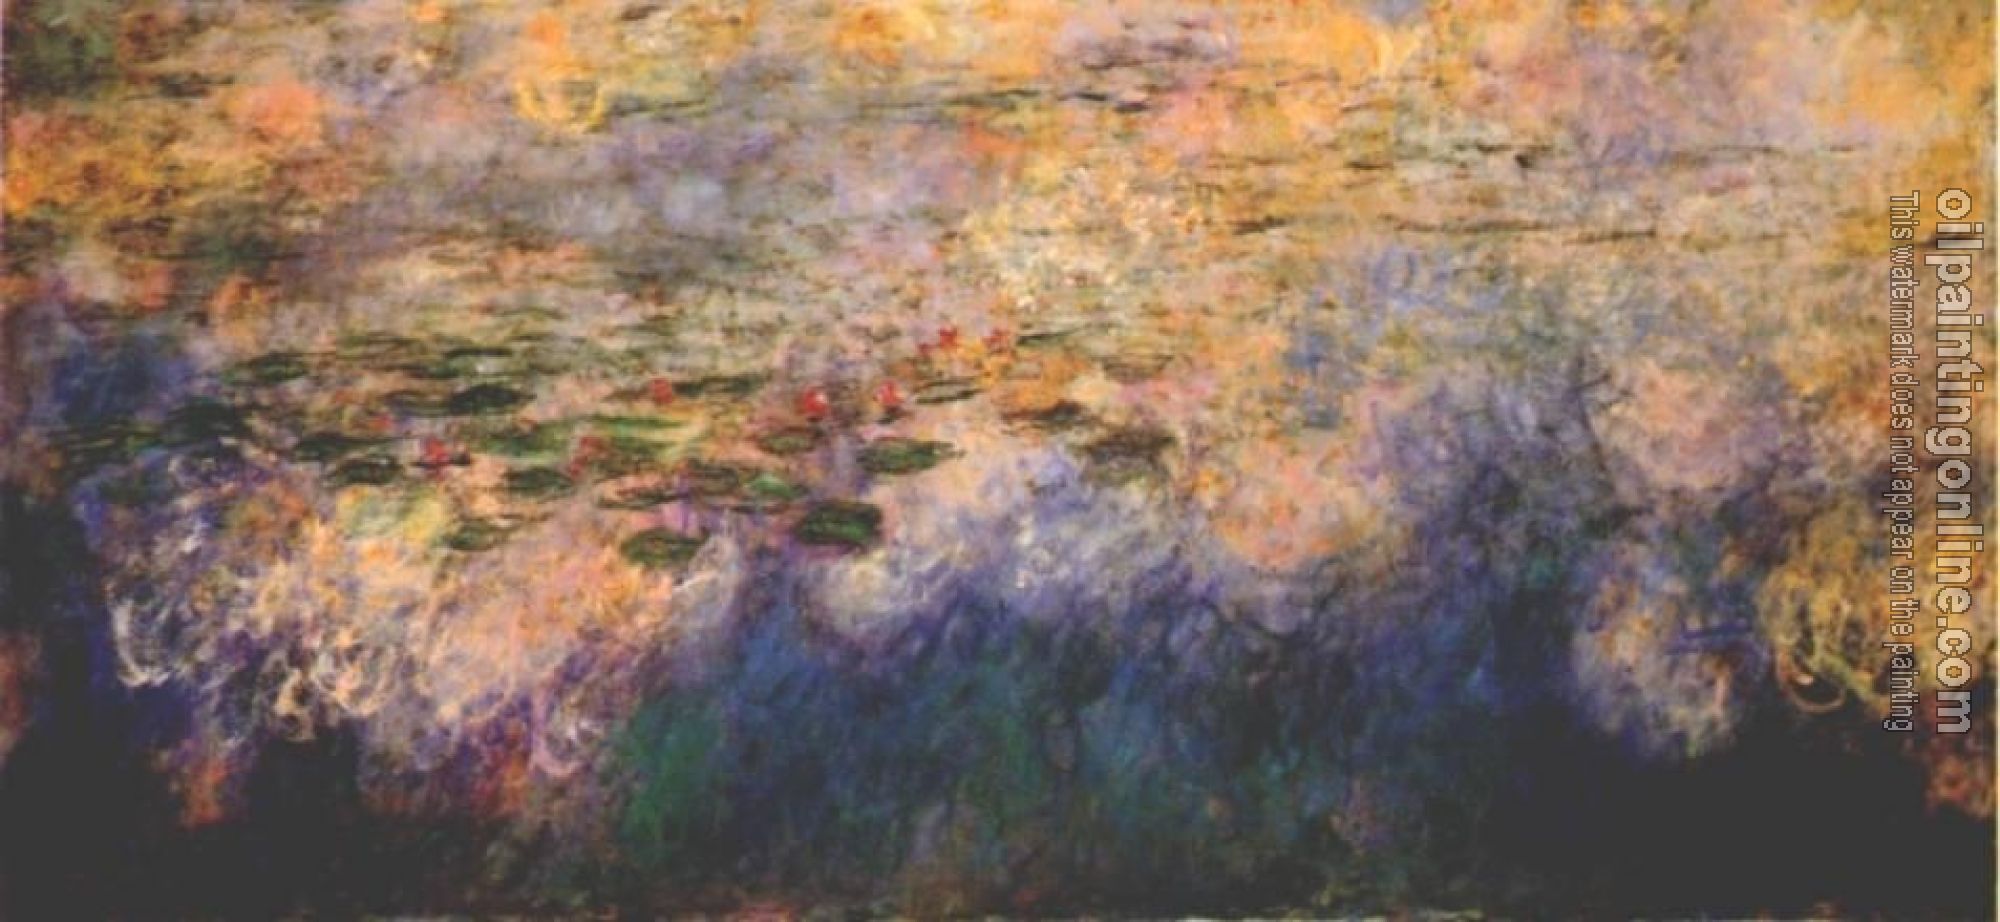 Monet, Claude Oscar - Reflections of Clouds on the Water-Lily Pond-Center Panel